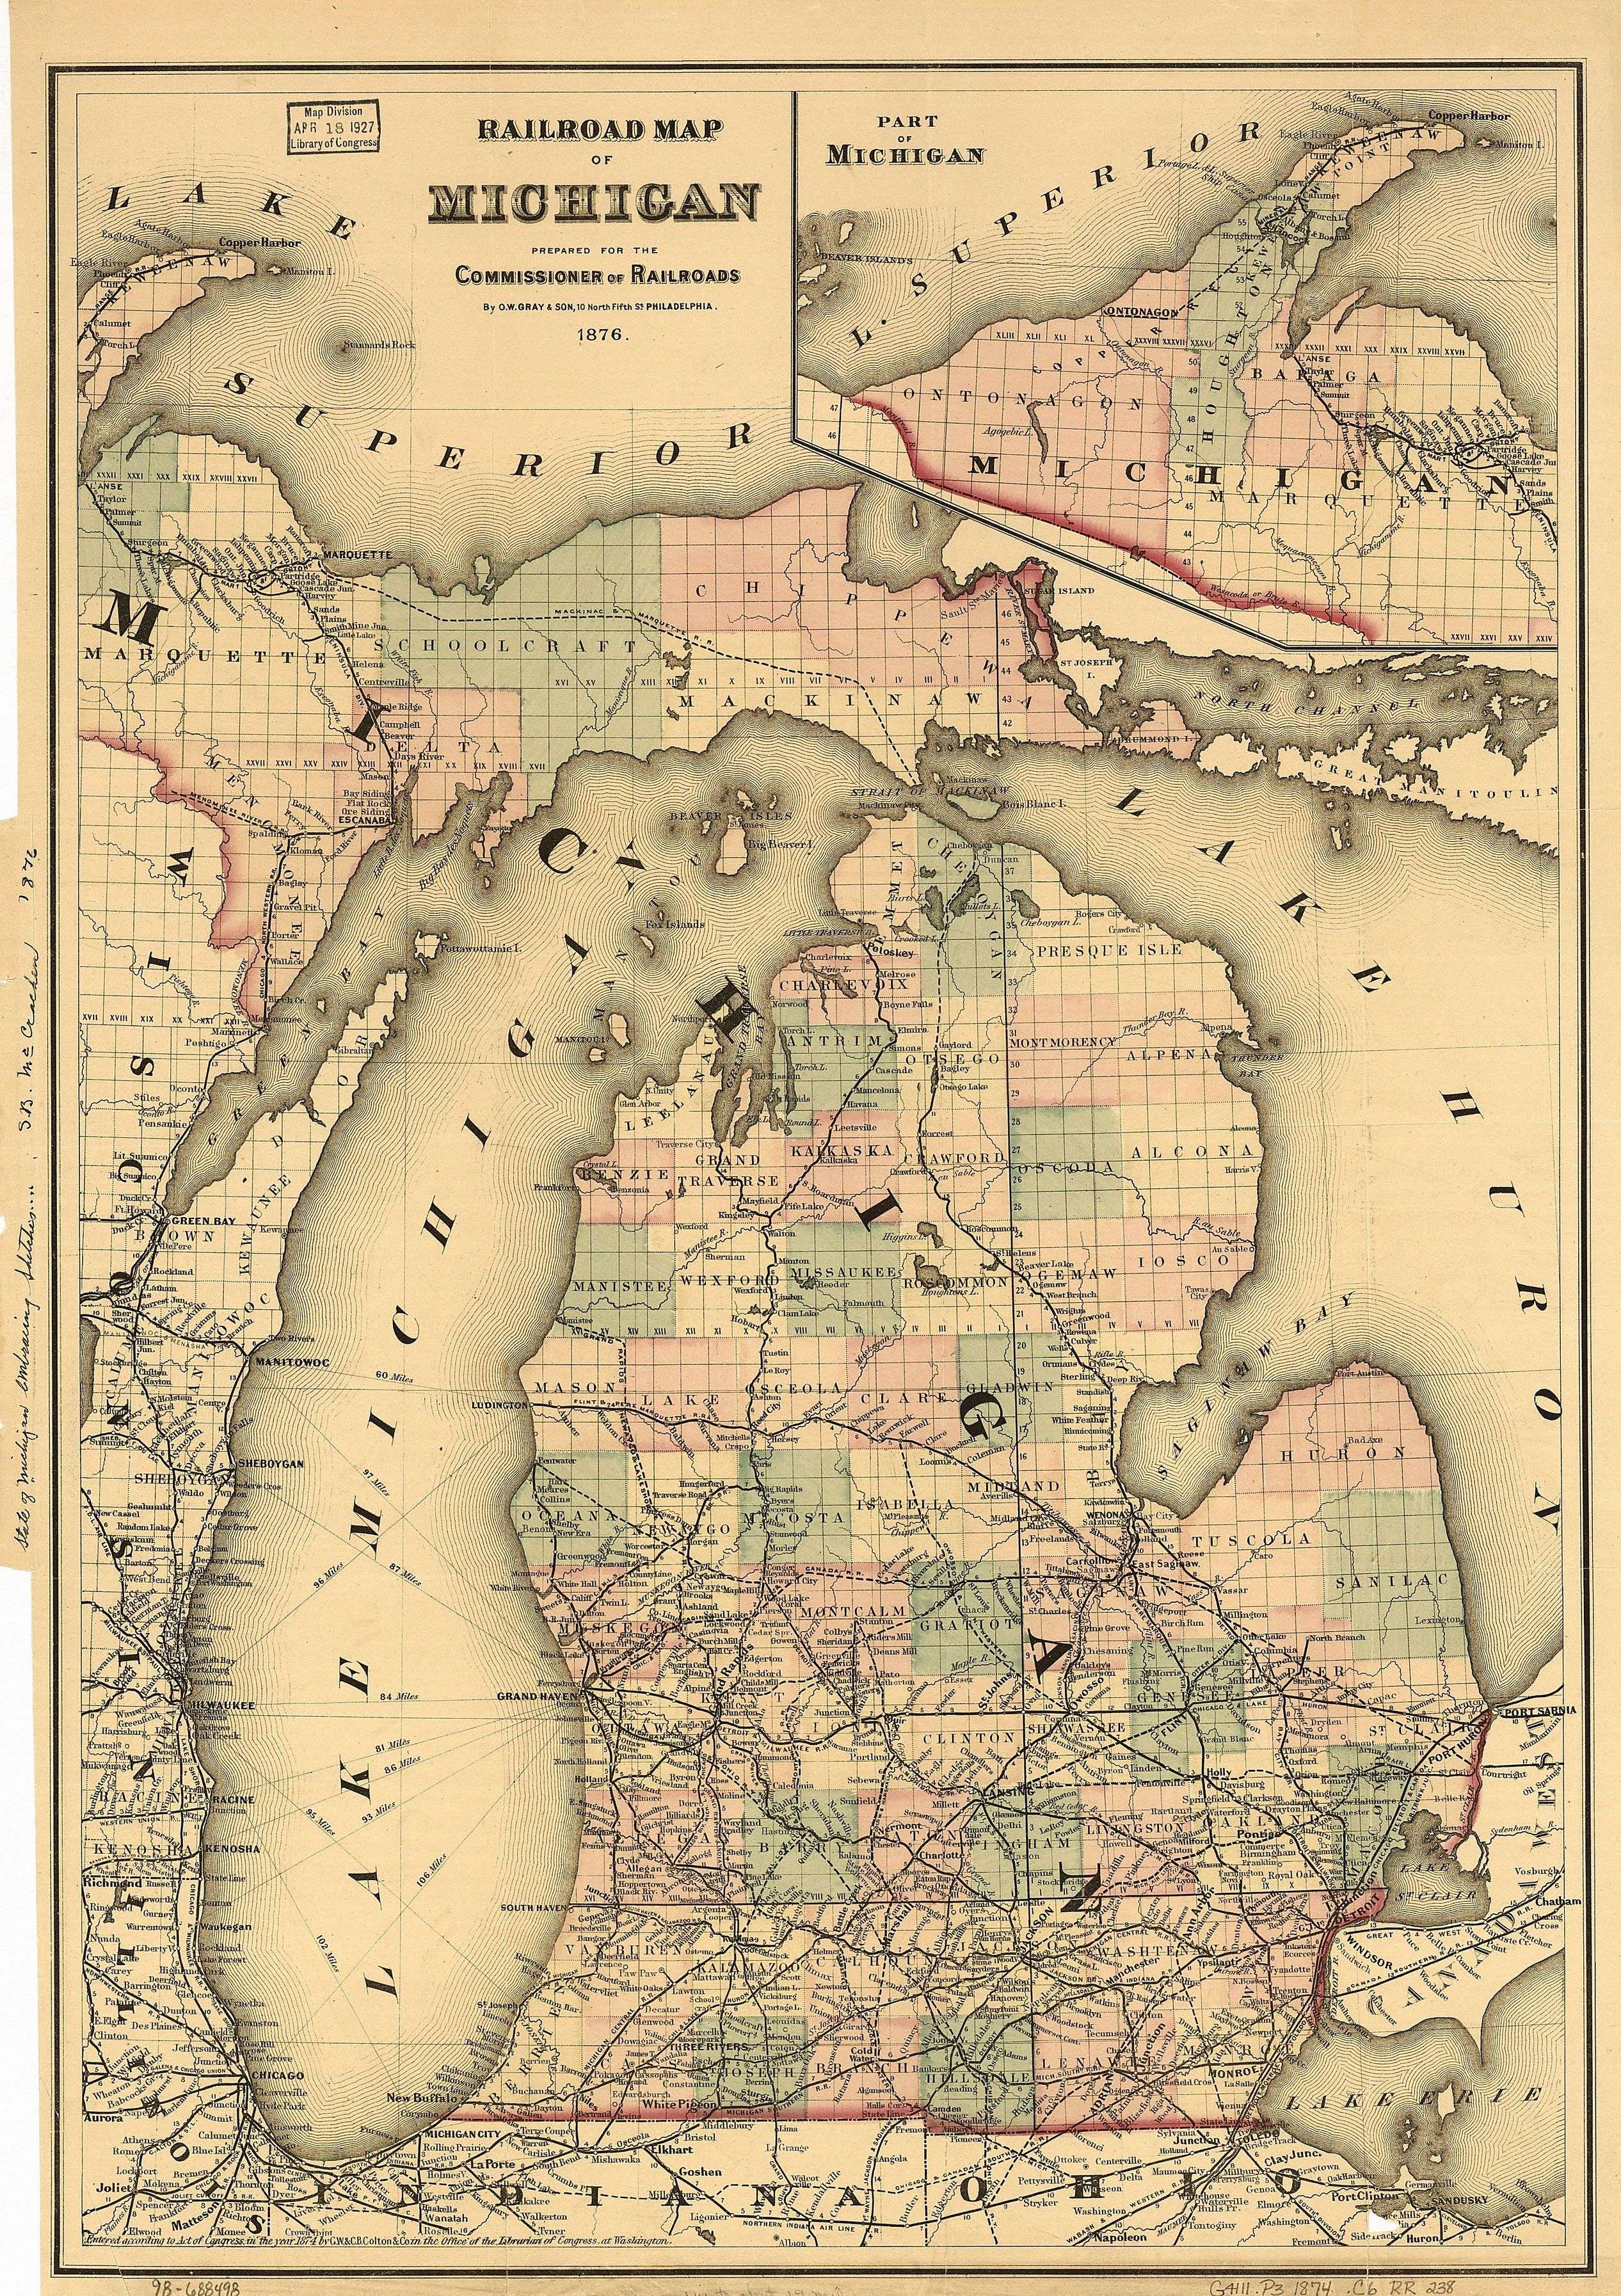 Wood, Jr. ministered in Charlevoix and Petoskey from 1872 to 1879. During this time period, the Grand Rapids and Indiana Railroad opened its line north to Petoskey. He returned to Northern Michigan from ~1893 to 1901, where he published the Mackinaw Witness in Mackinaw City.